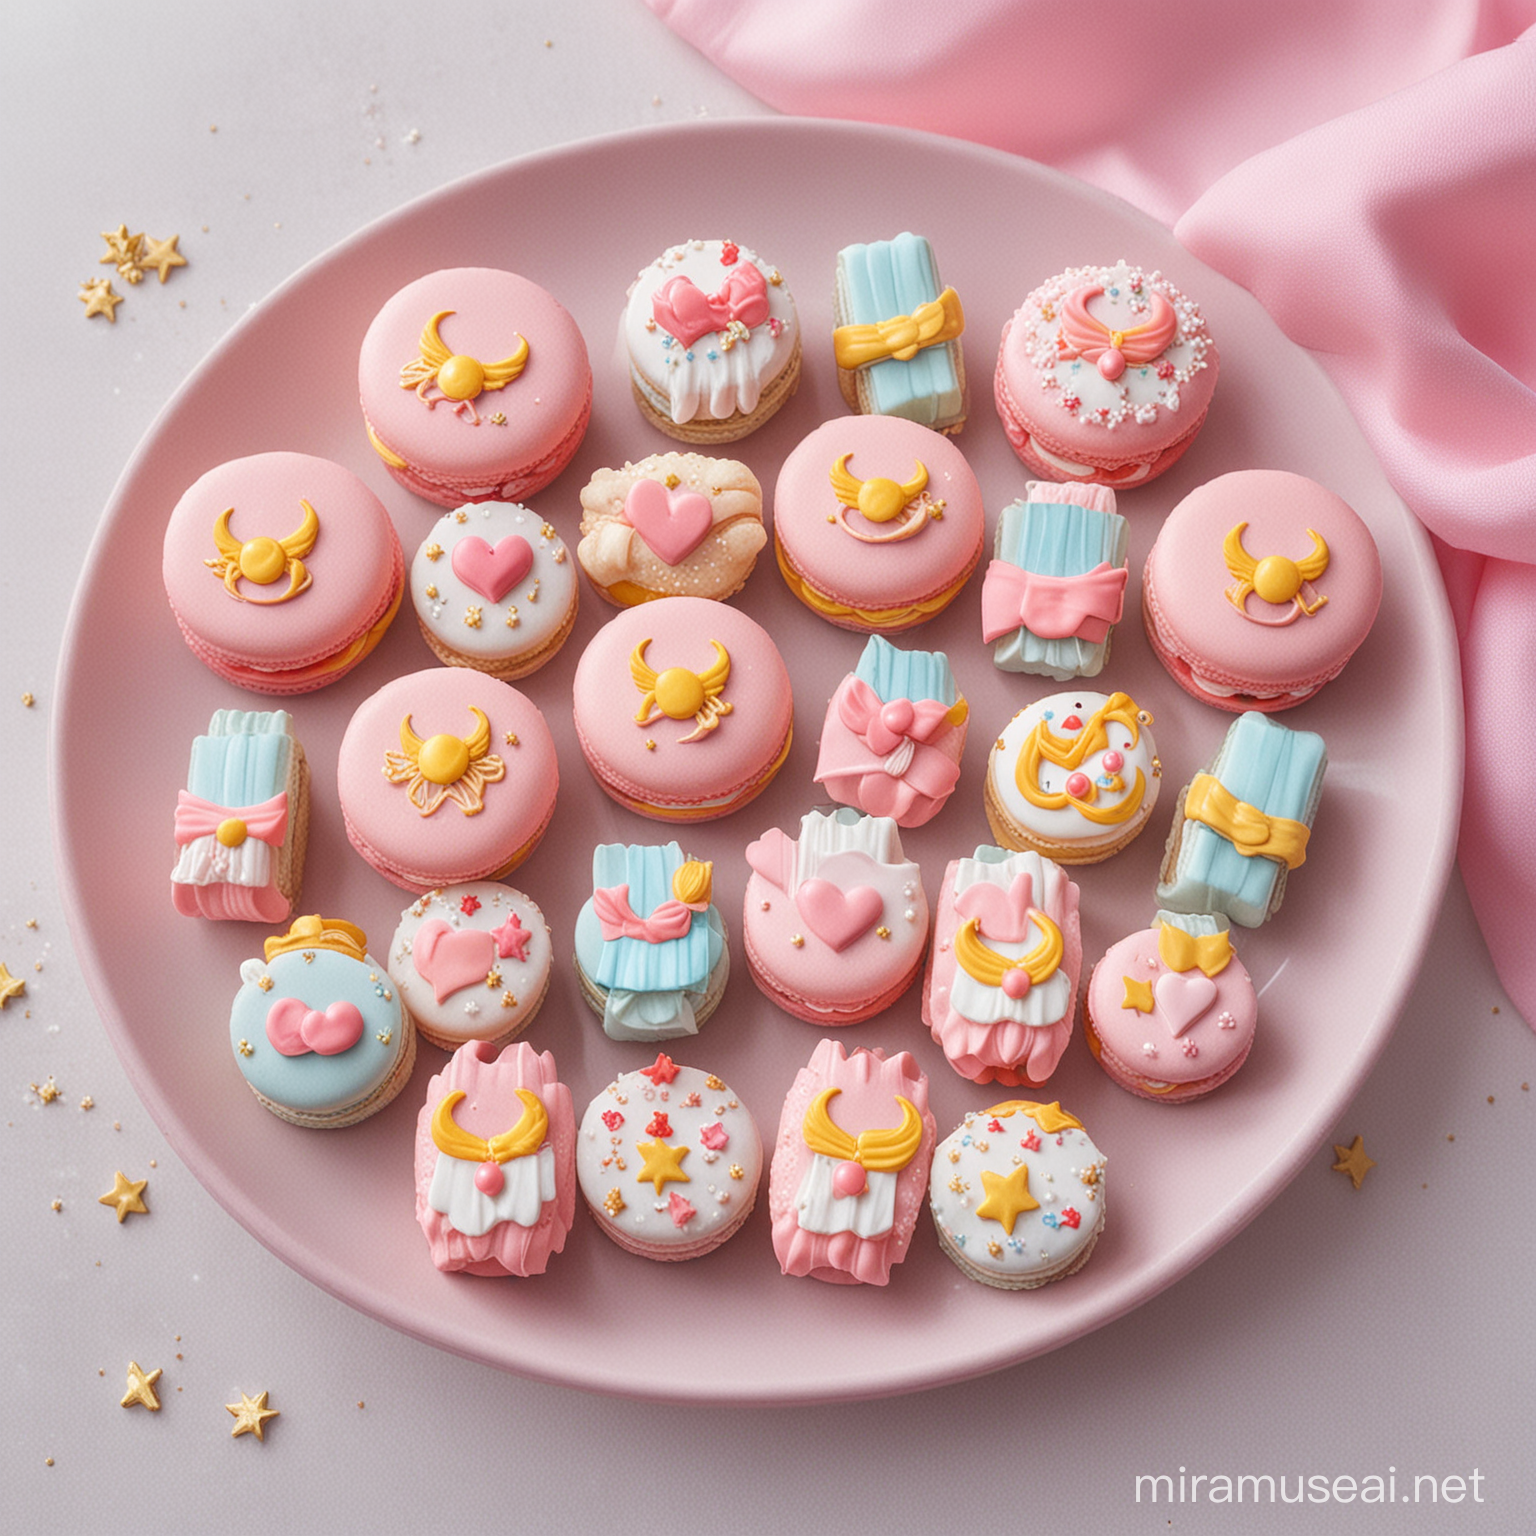 Colorful Sailor Moon Macarons Delightful Dessert Inspired by Anime Characters